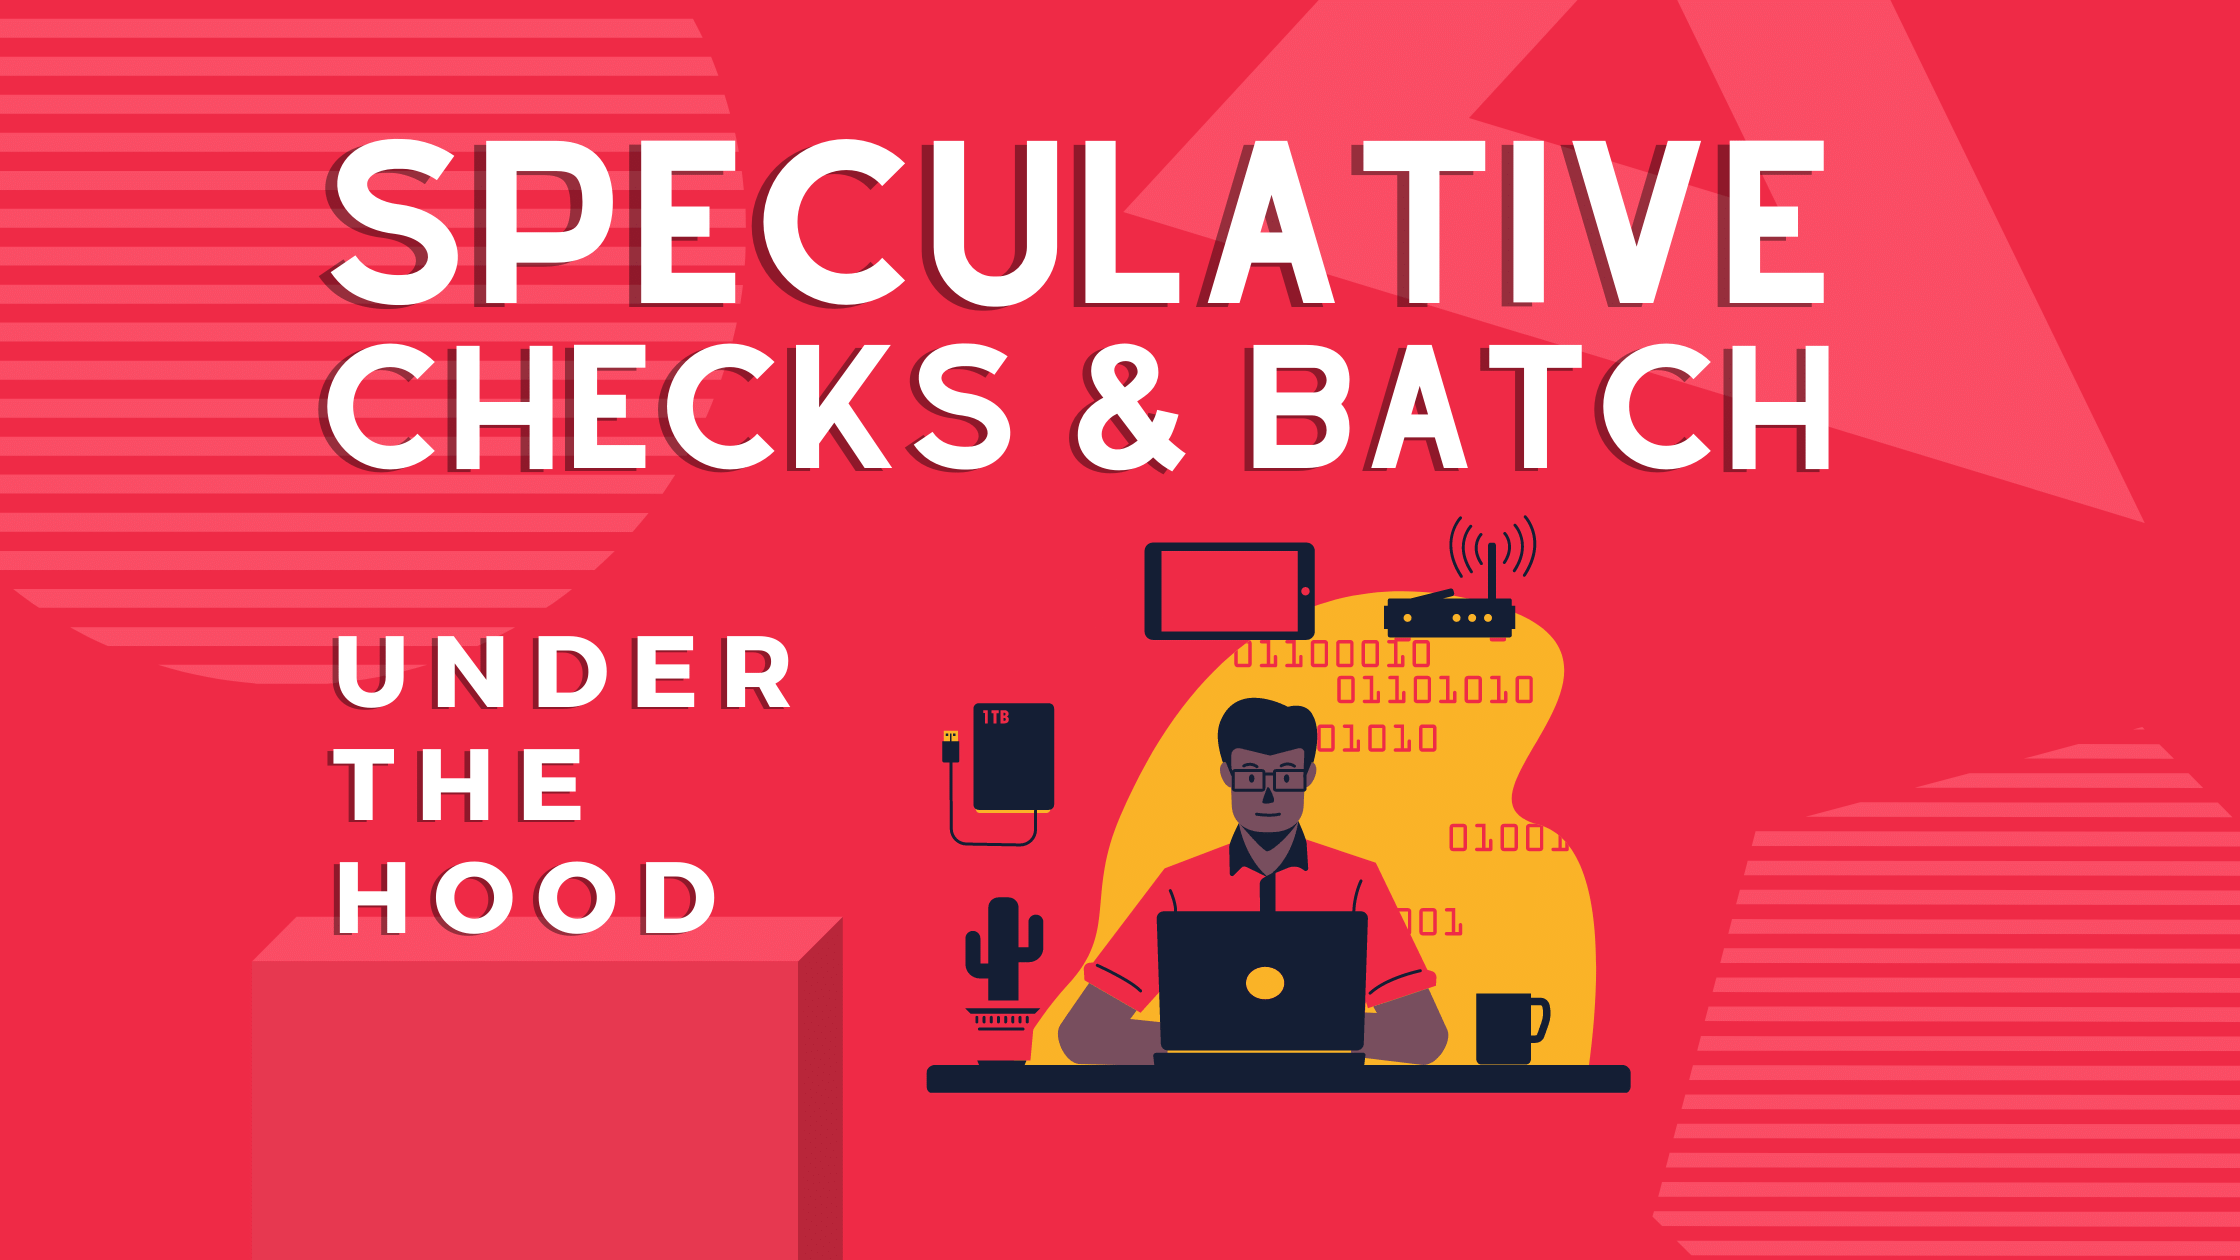 Speculative Checks and Batch: Under the Hood